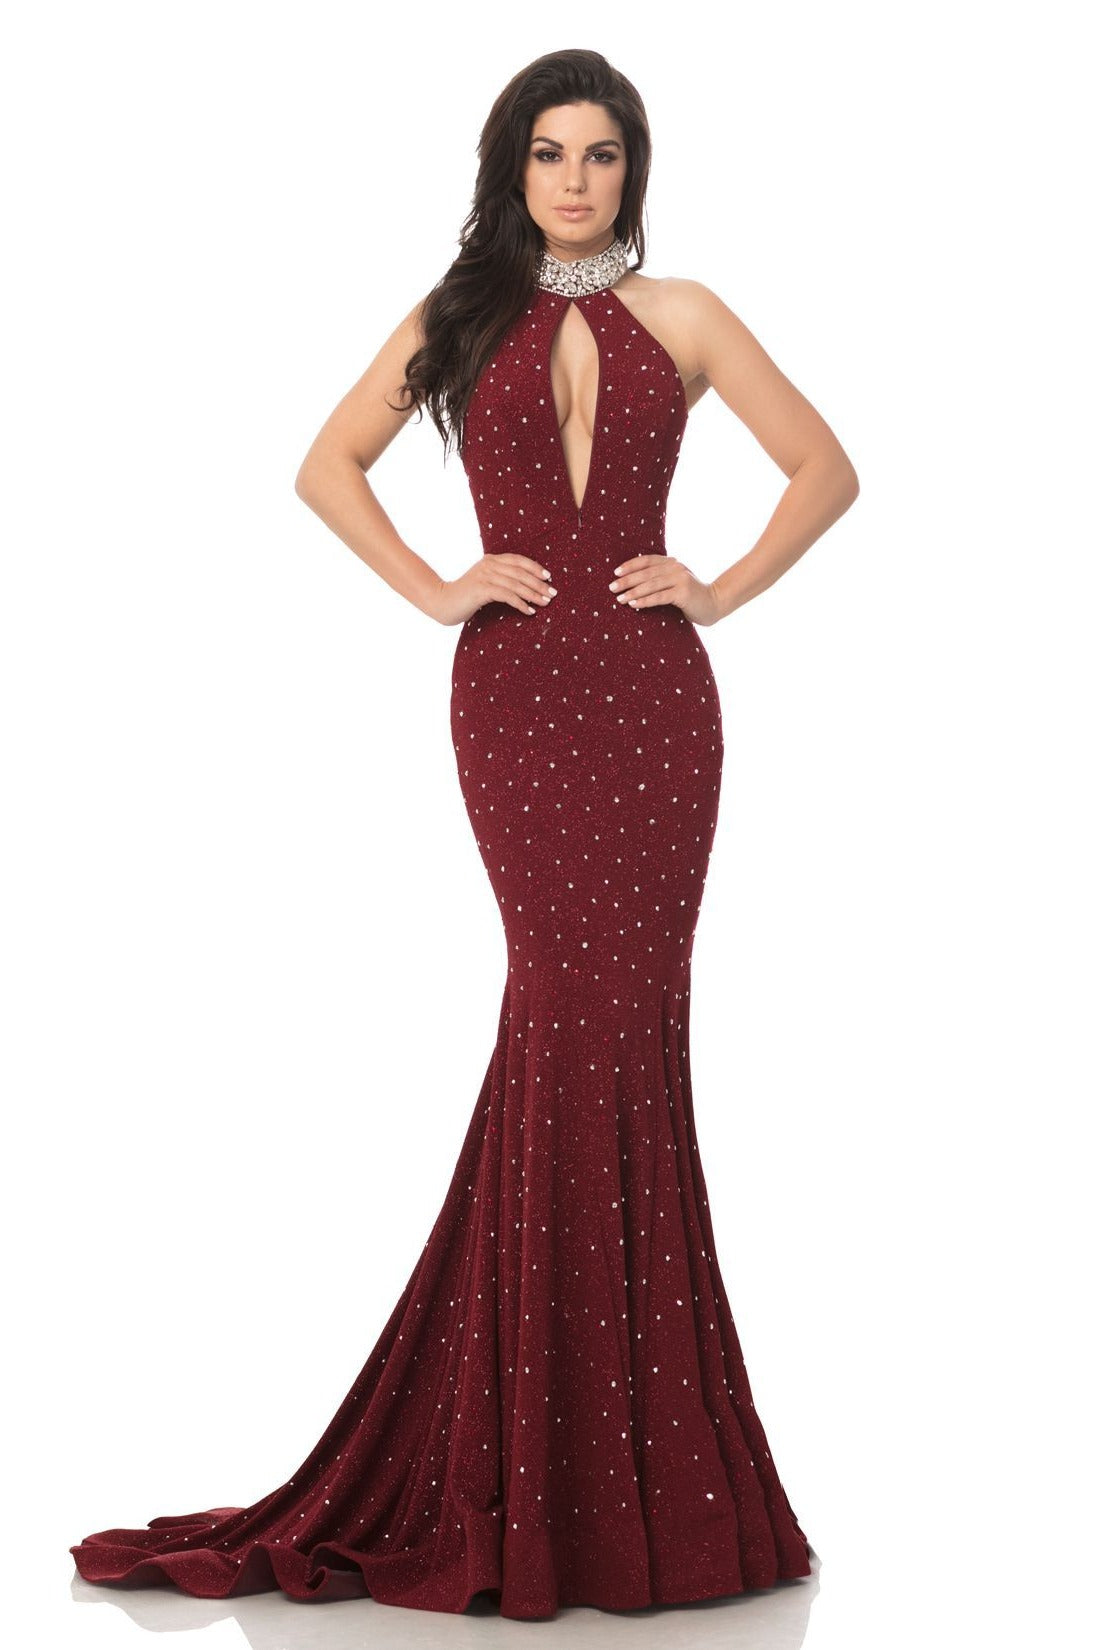 Johnathan Kayne 8235 is a choker neckline Prom Dress, Pageant Gown & formal evening Wear. CONVERTIBLE NECKLINE!  Red carpet glam, this choker neckline is encrusted with hand beaded crystals and stones rain down the silhouette of this glitter stretch knit halter mermaid gown. The neckline features an invisible zipper that allows you to choose a neckline.